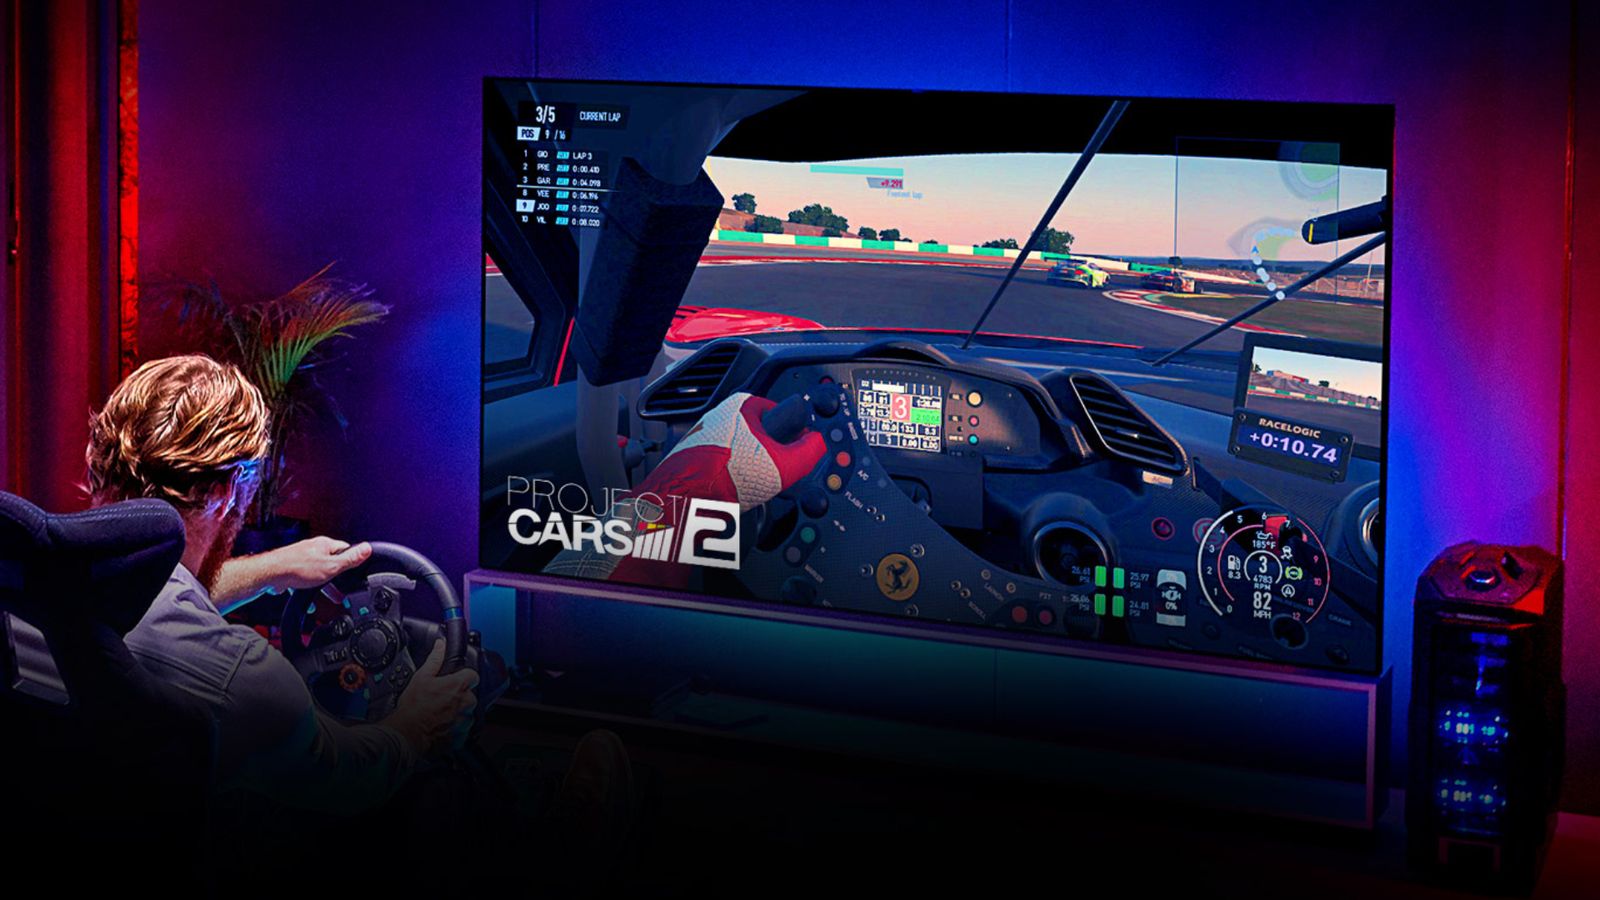 Image of someone playing Project Cars 2 with a racing wheel on a large flatscreen TV with blue and red lighting behind it.